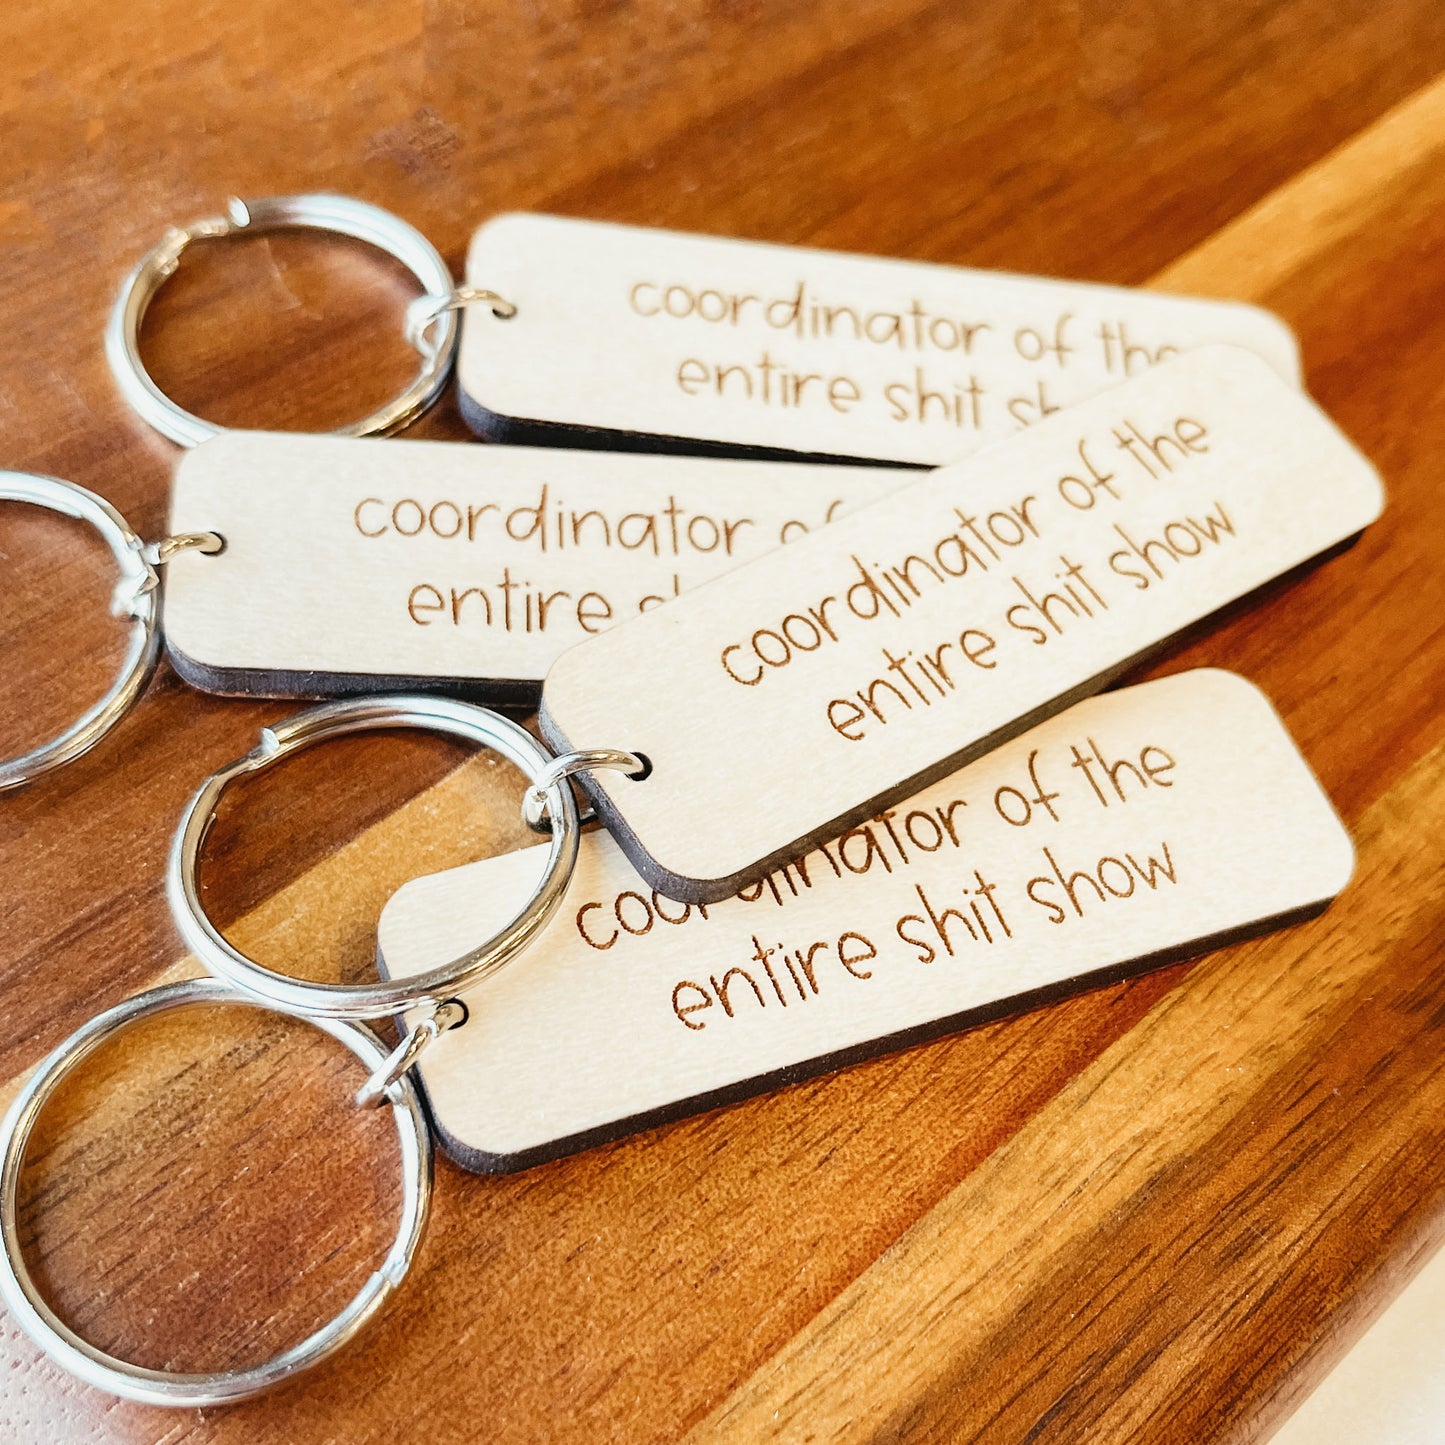 Coordinator Of The Entire Shit Show Keychain